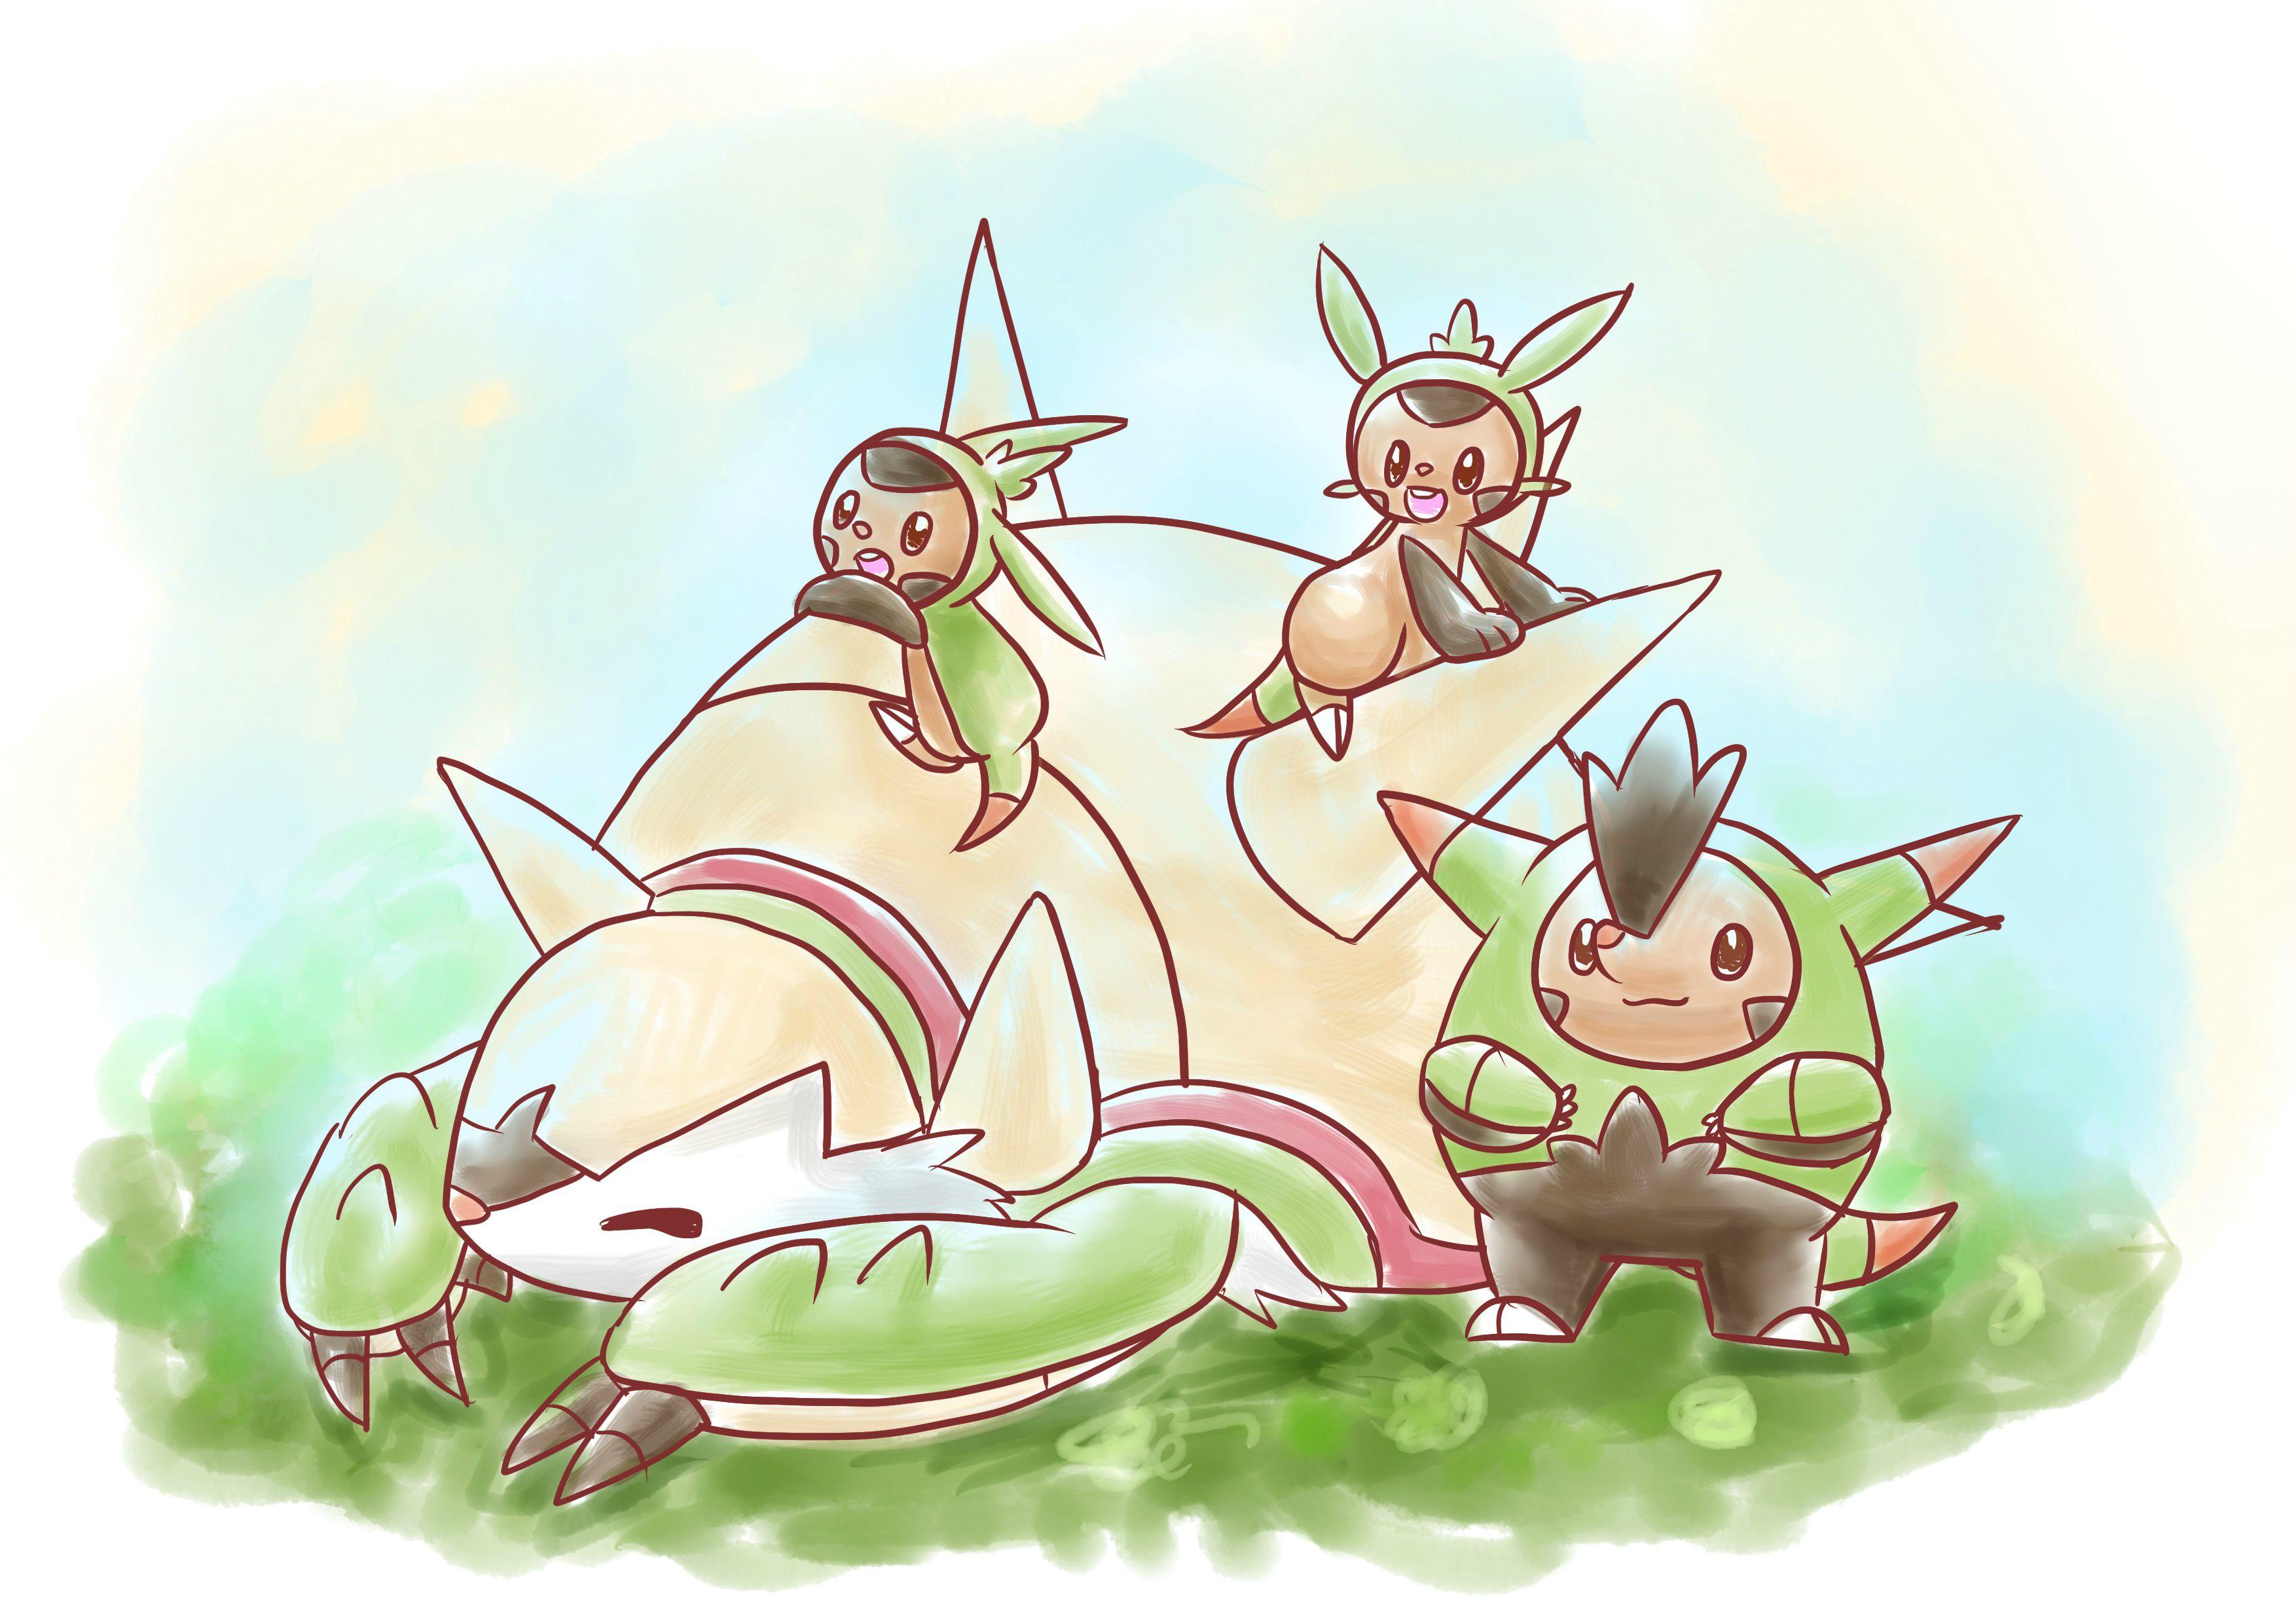 Adorable Chesnaught fanart (XY Spoilers)